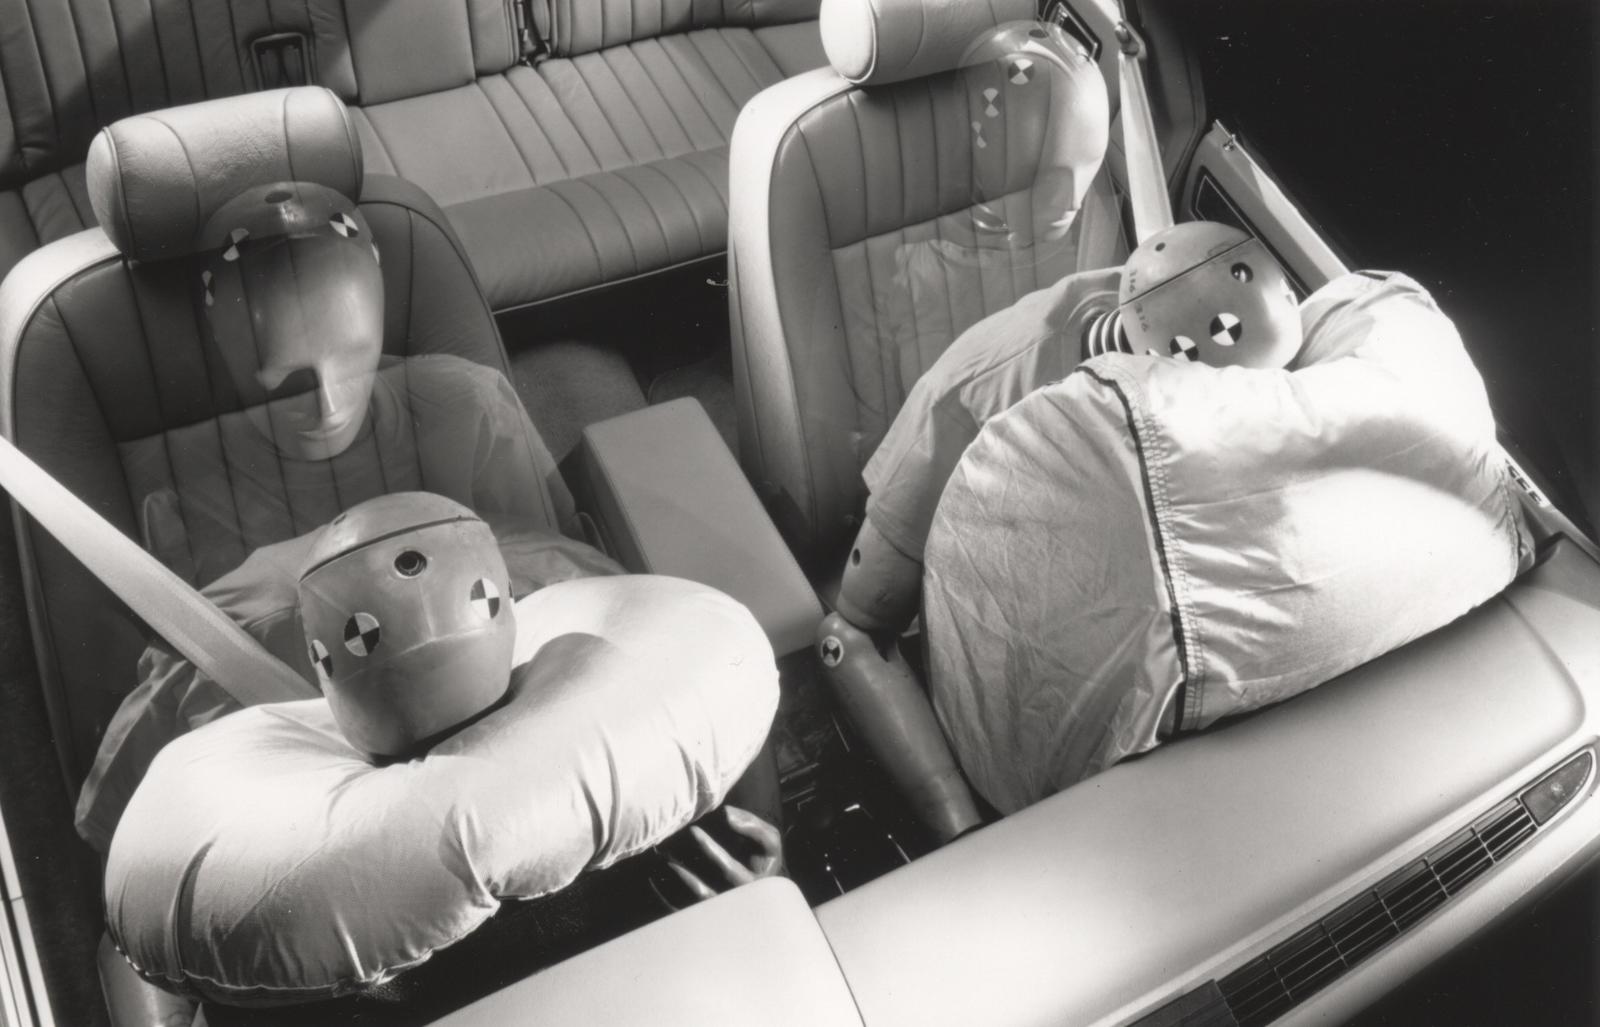 takata-airbags-were-adopted-in-late-1990s-to-save-a-few-dollars-per-vehicle_2